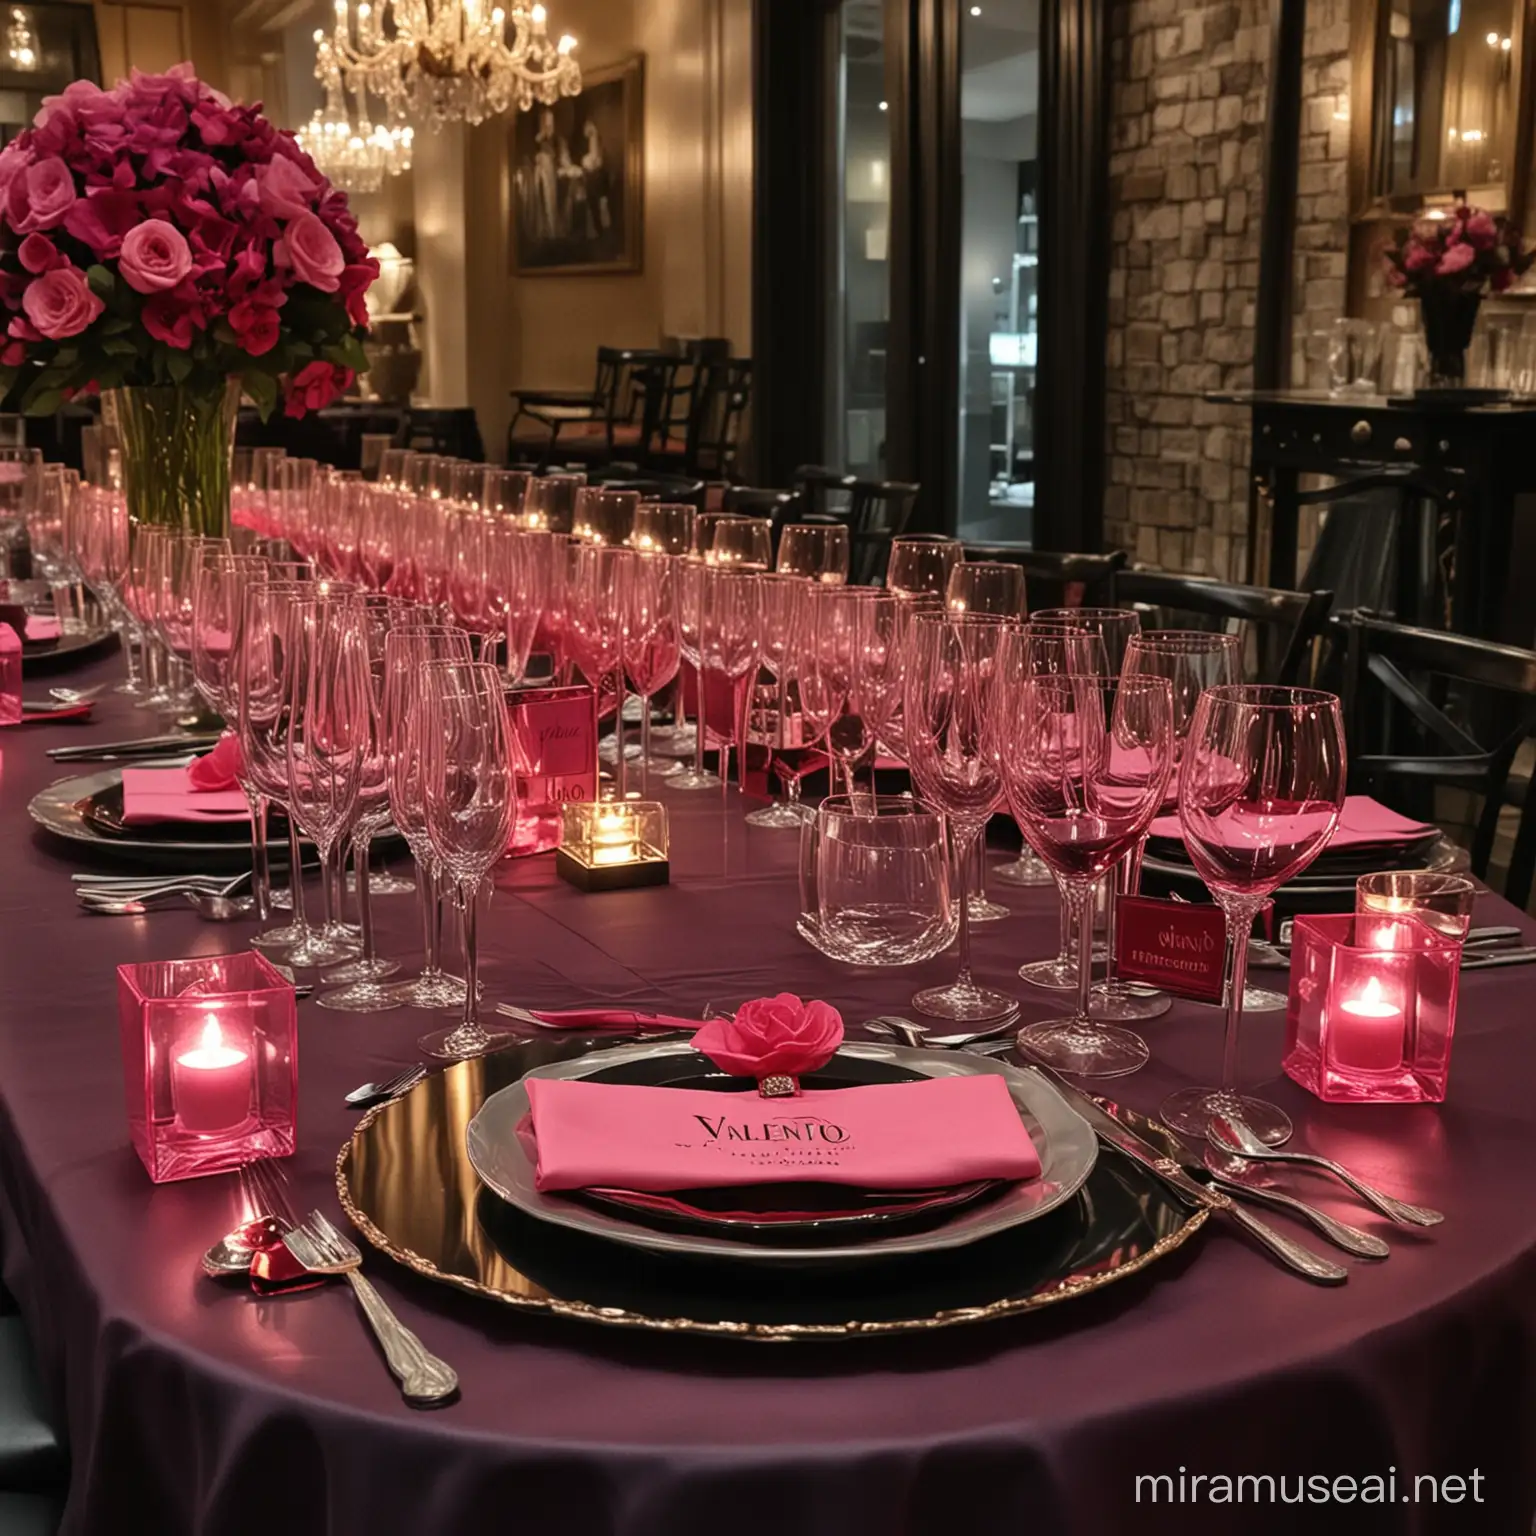 A very elegant and luxury table setting for a Valentino Born in Roma Intense Perfume Launch party at night. Night time theme. that fits the brand and colors of the perfume. inside a bar. use more hot pink and black. indoors. 30 person table